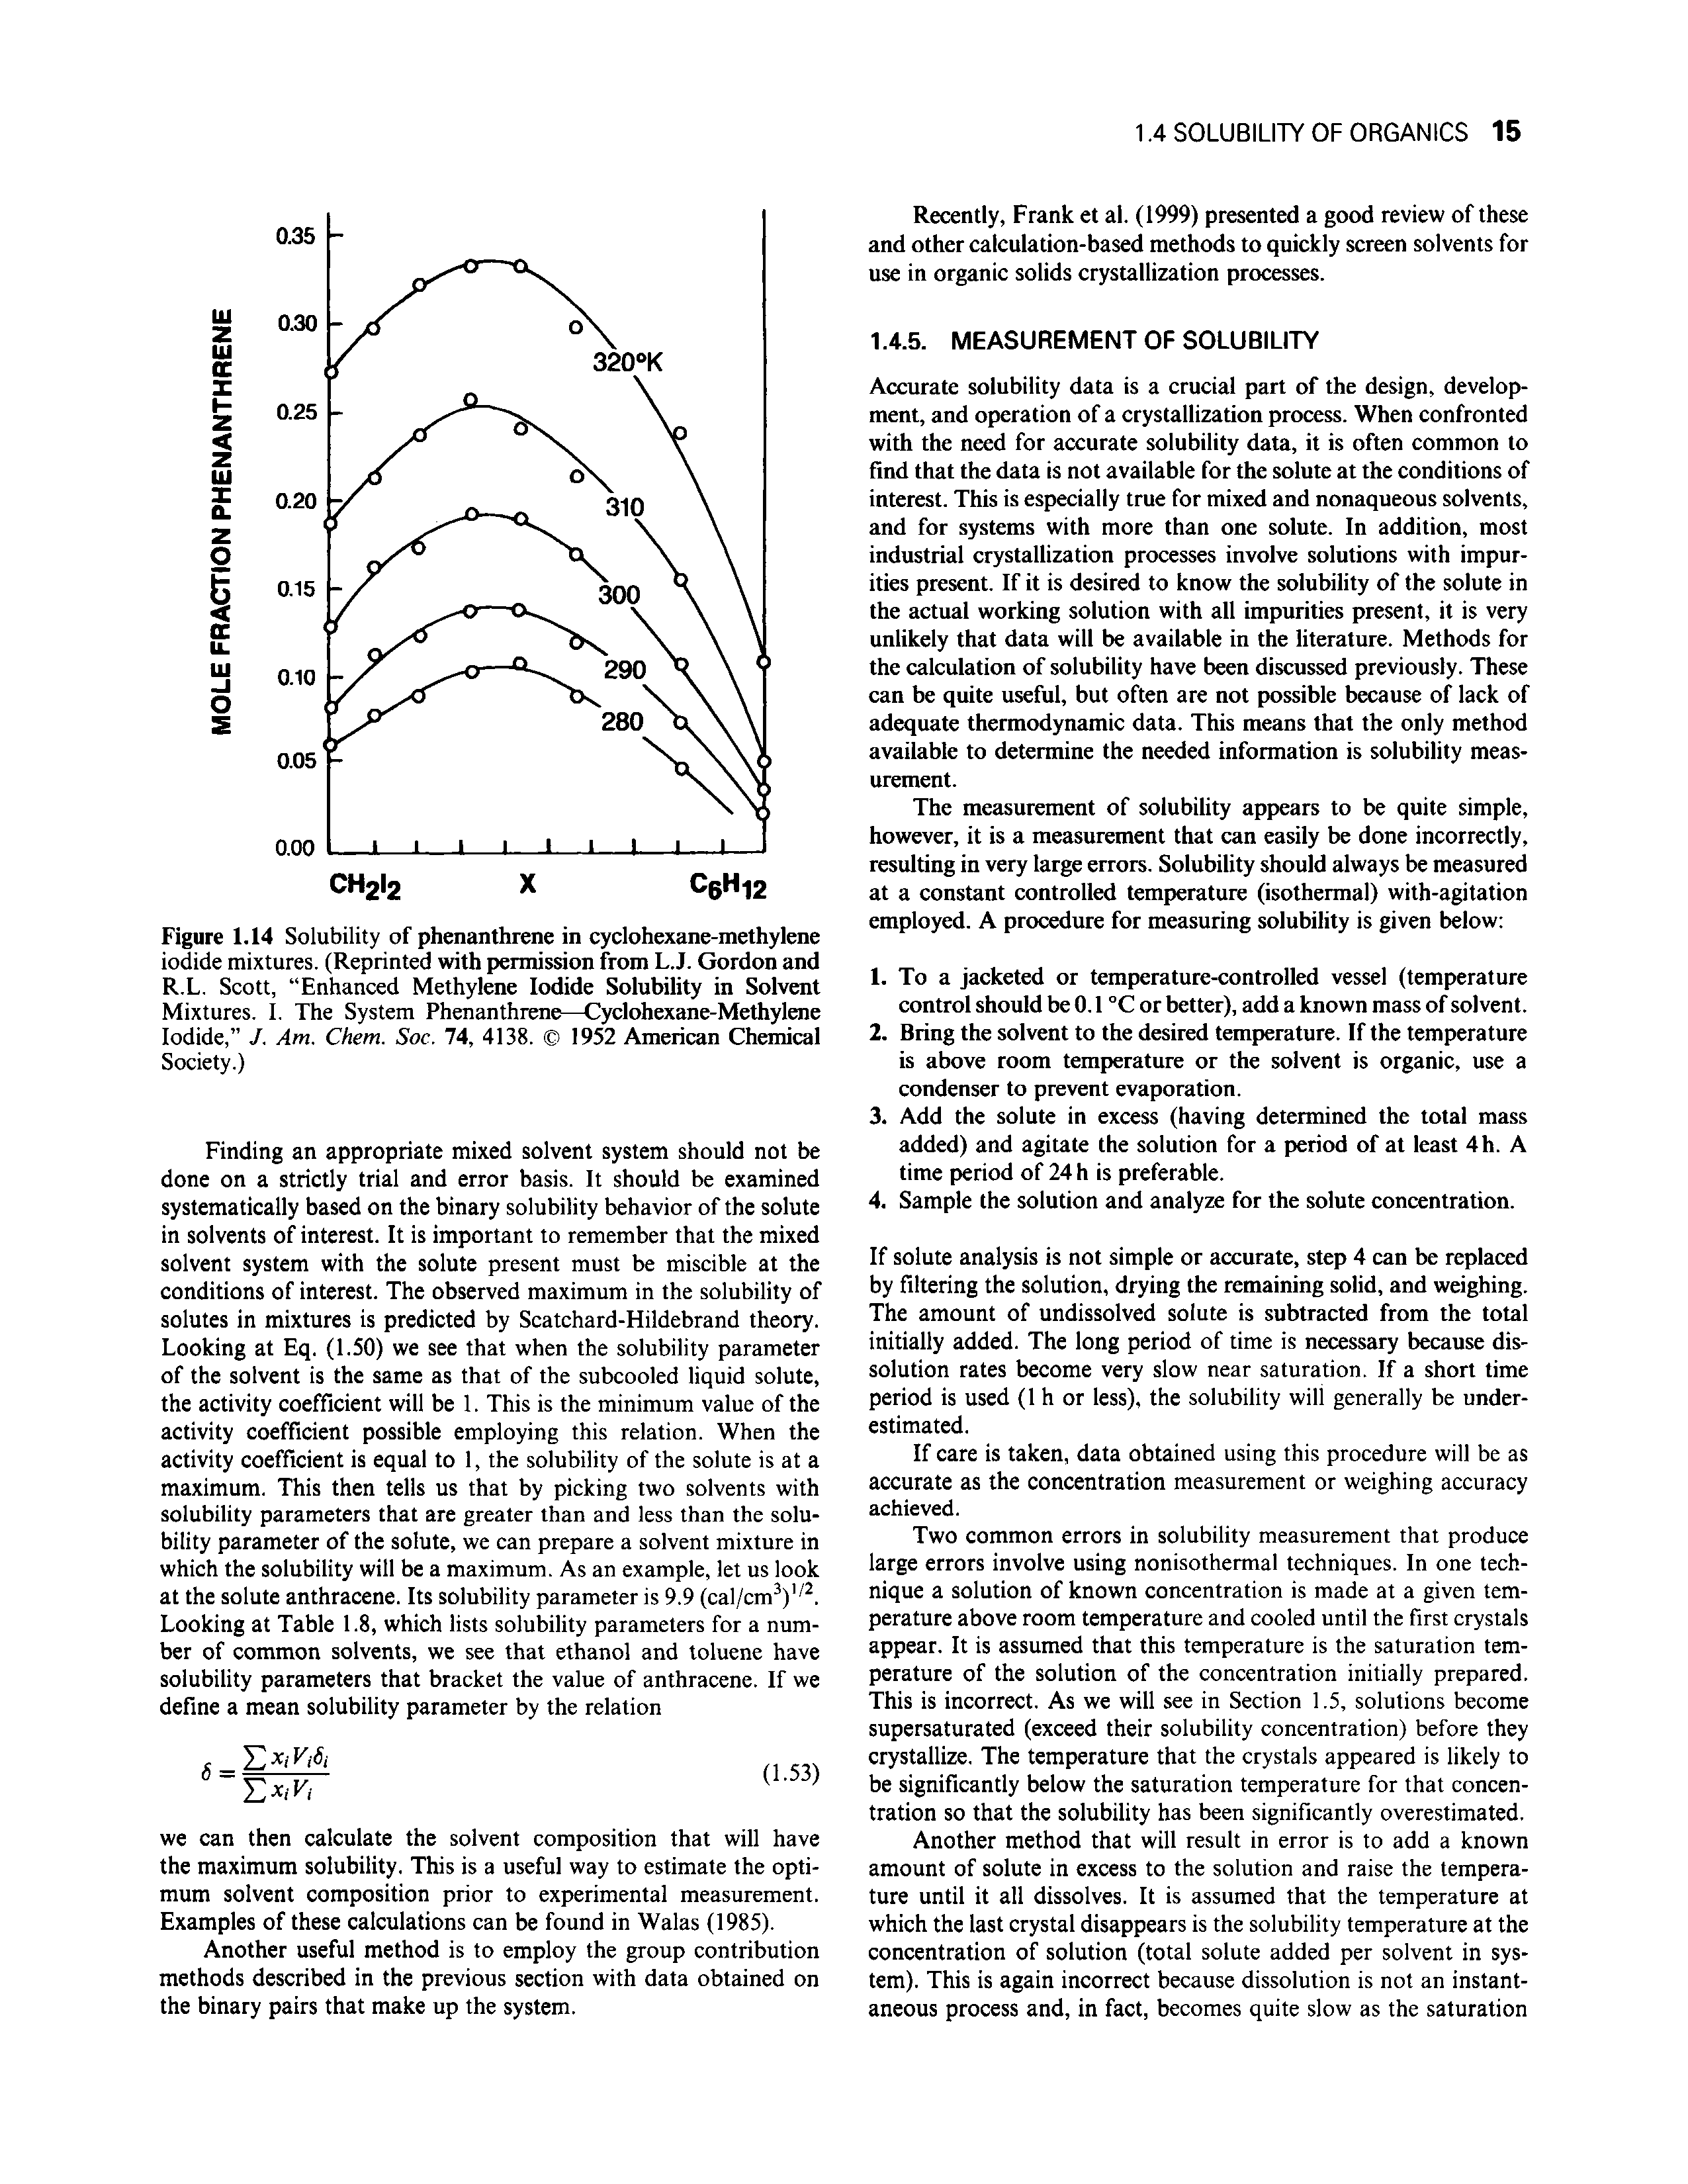 Figure 1.14 Solubility of phenanthrene in cyclohexane-methylene iodide mixtures. (Reprinted with permission from L.J. Gordon and R.L. Scott, Enhanced Methylene Iodide Solubility in Solvent Mixtures. I. The System Phenanthrene—Cyclohexane-Methylene Iodide, J. Am. Chem. Soc. 74, 4138. 1952 American Chemical Society.)...